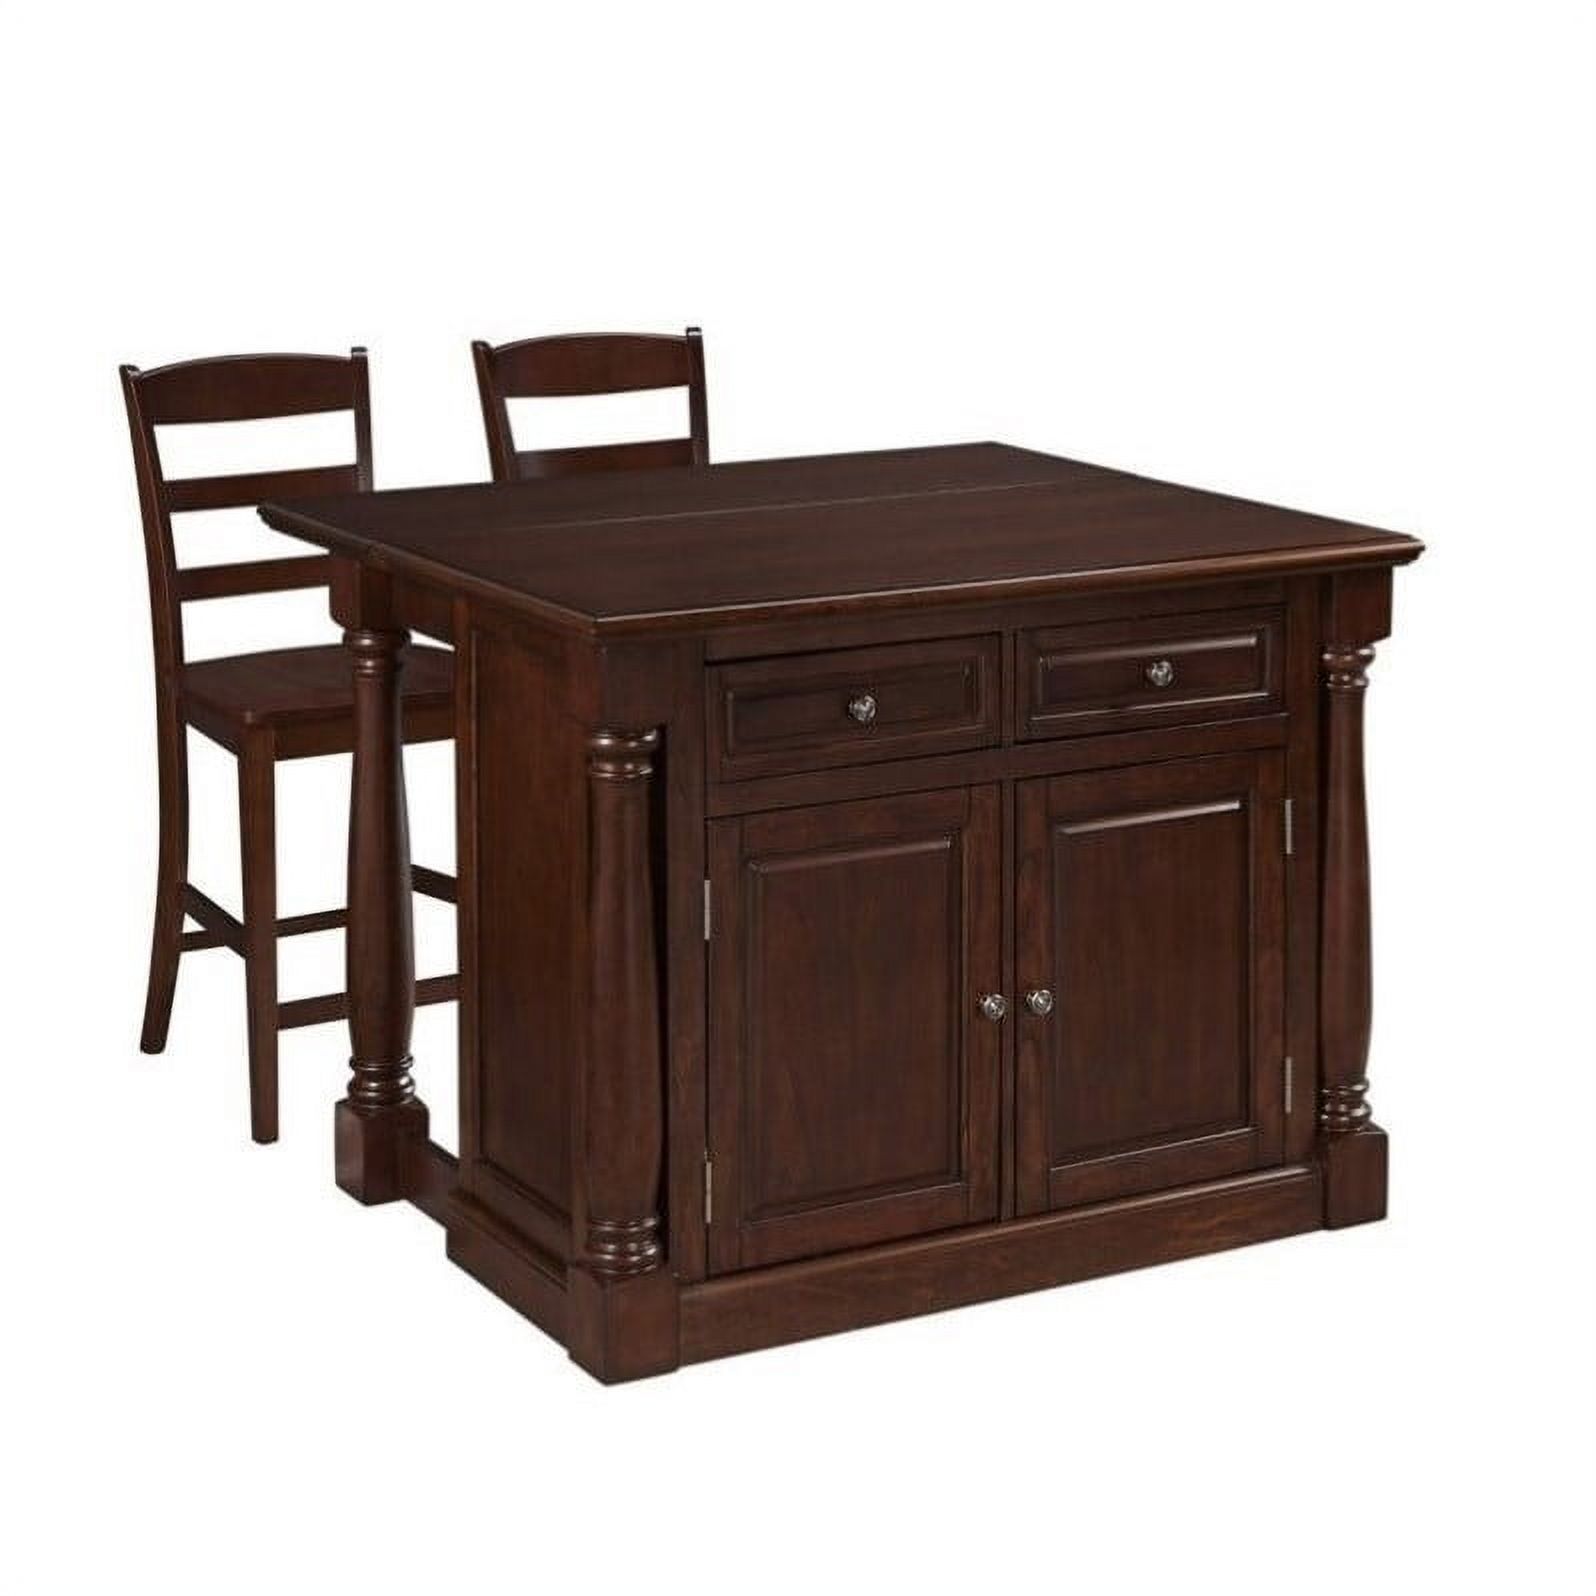 Kitchen Island with Two Stools in Cherry Finish - image 1 of 2